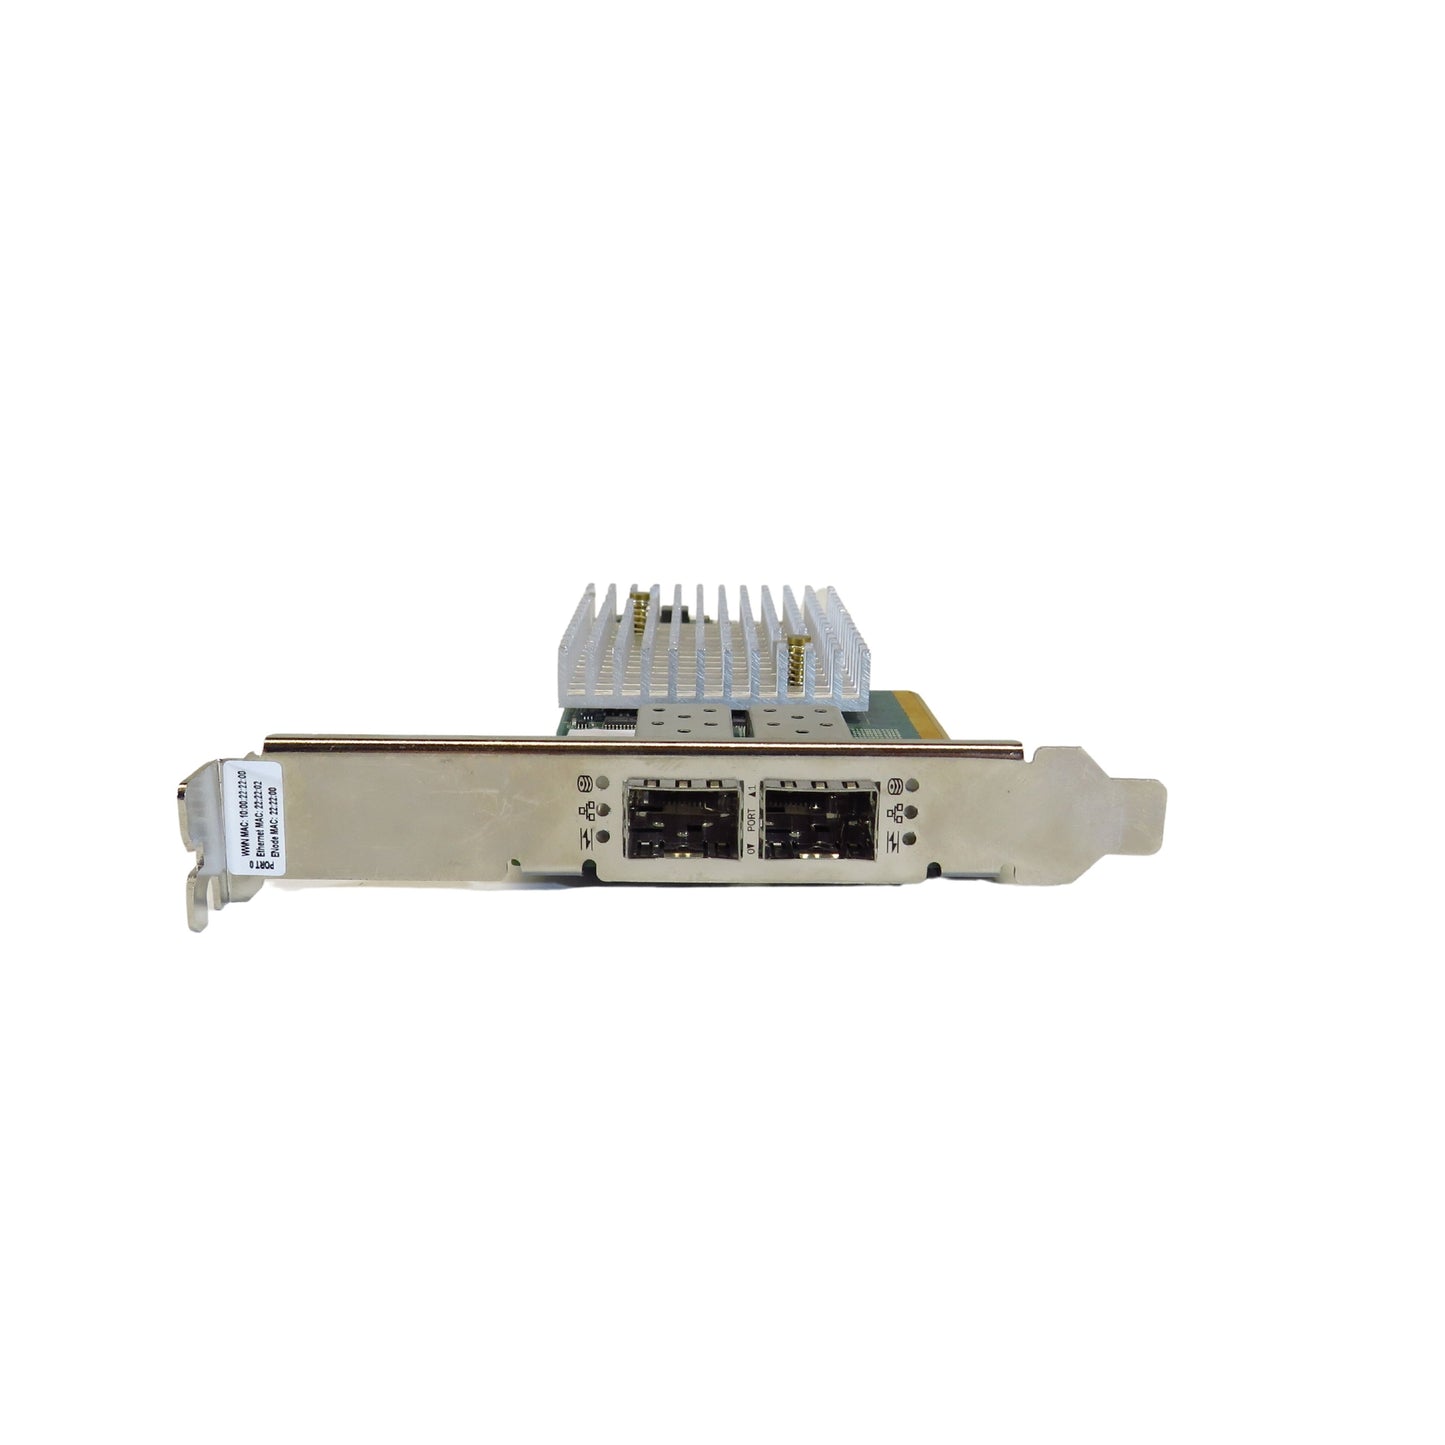 IBM 81Y1678 2 Port 16Gbps FC PCIe HBA Host Bust Adapter (Refurbished)